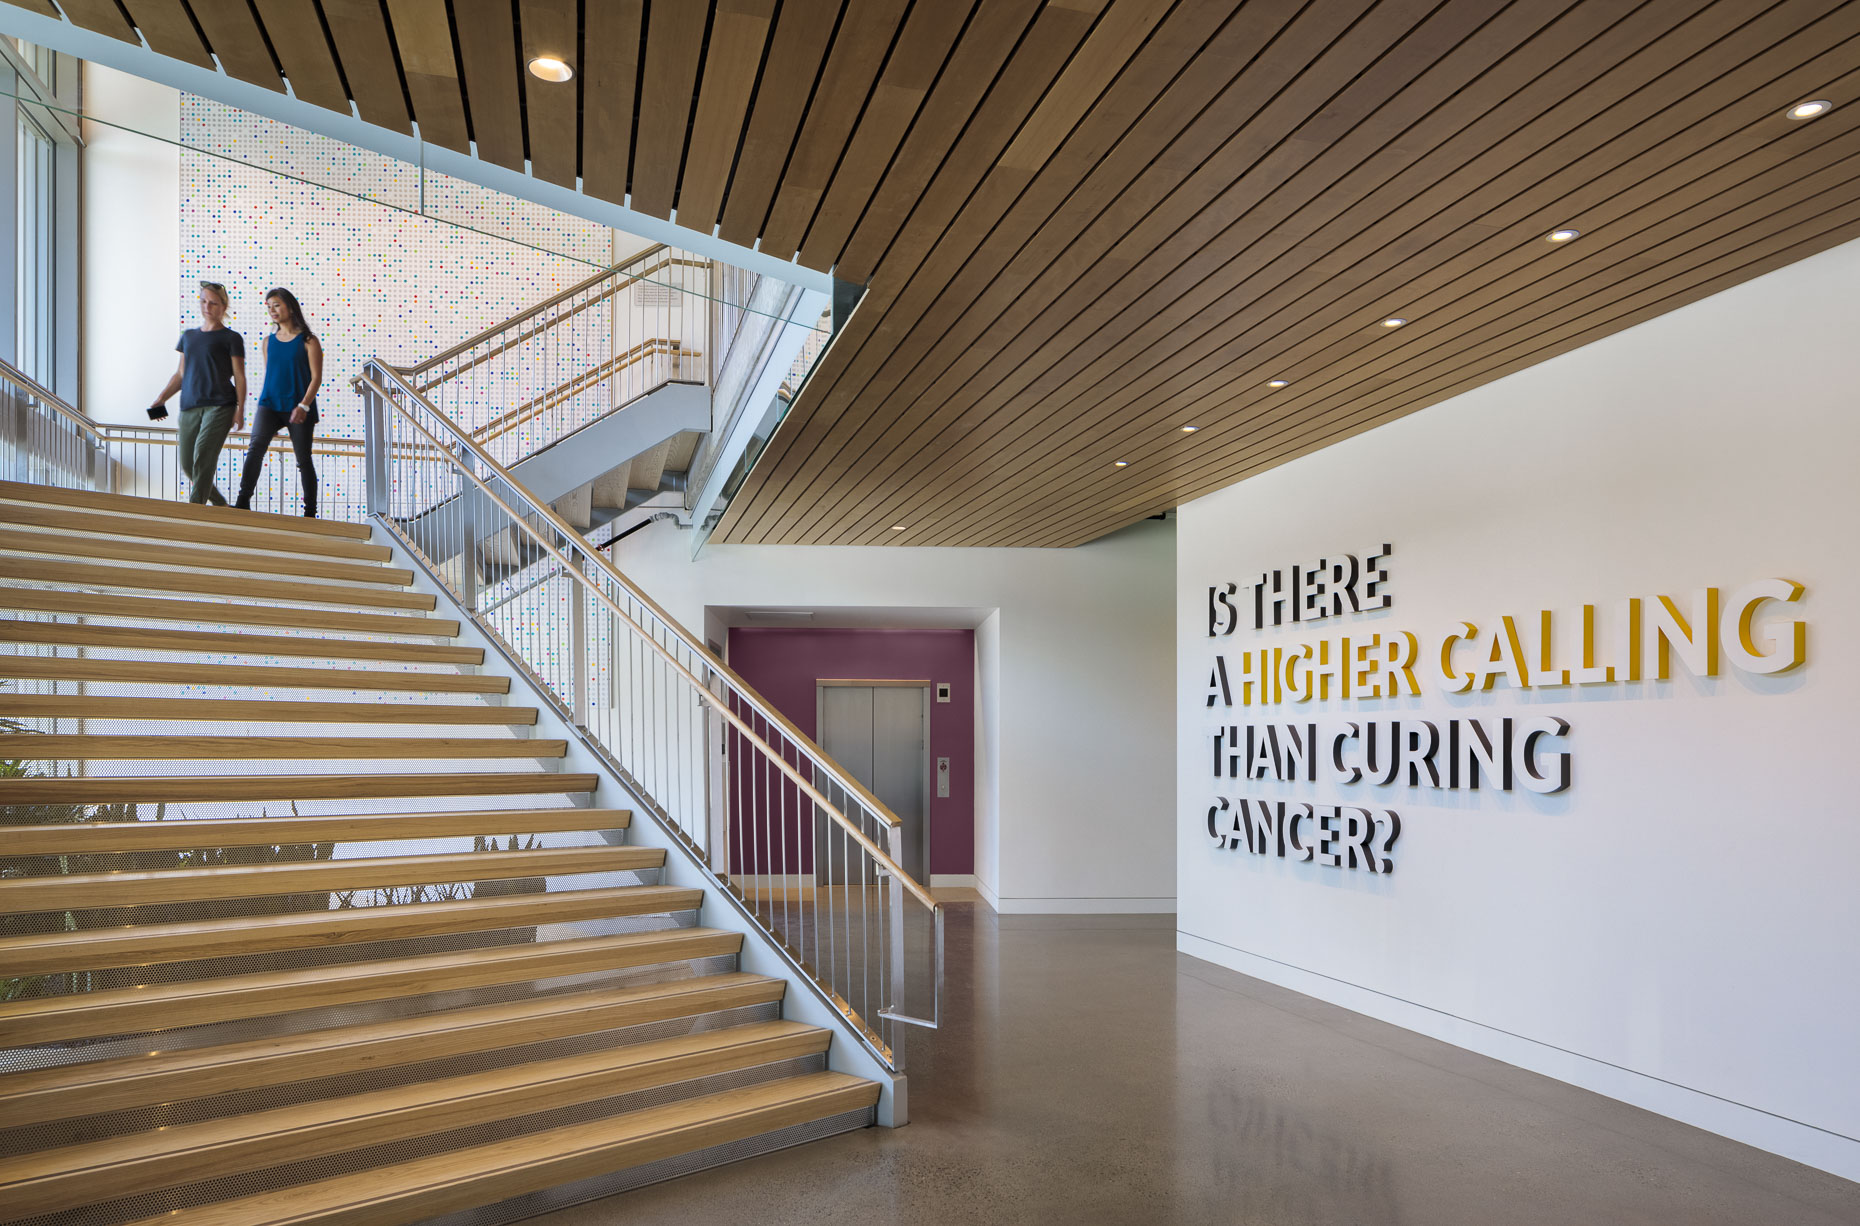 OHSU Knight Cancer Research Center by SRG Partnership photographed by Brad Feinknopf based in Columbus, Ohio